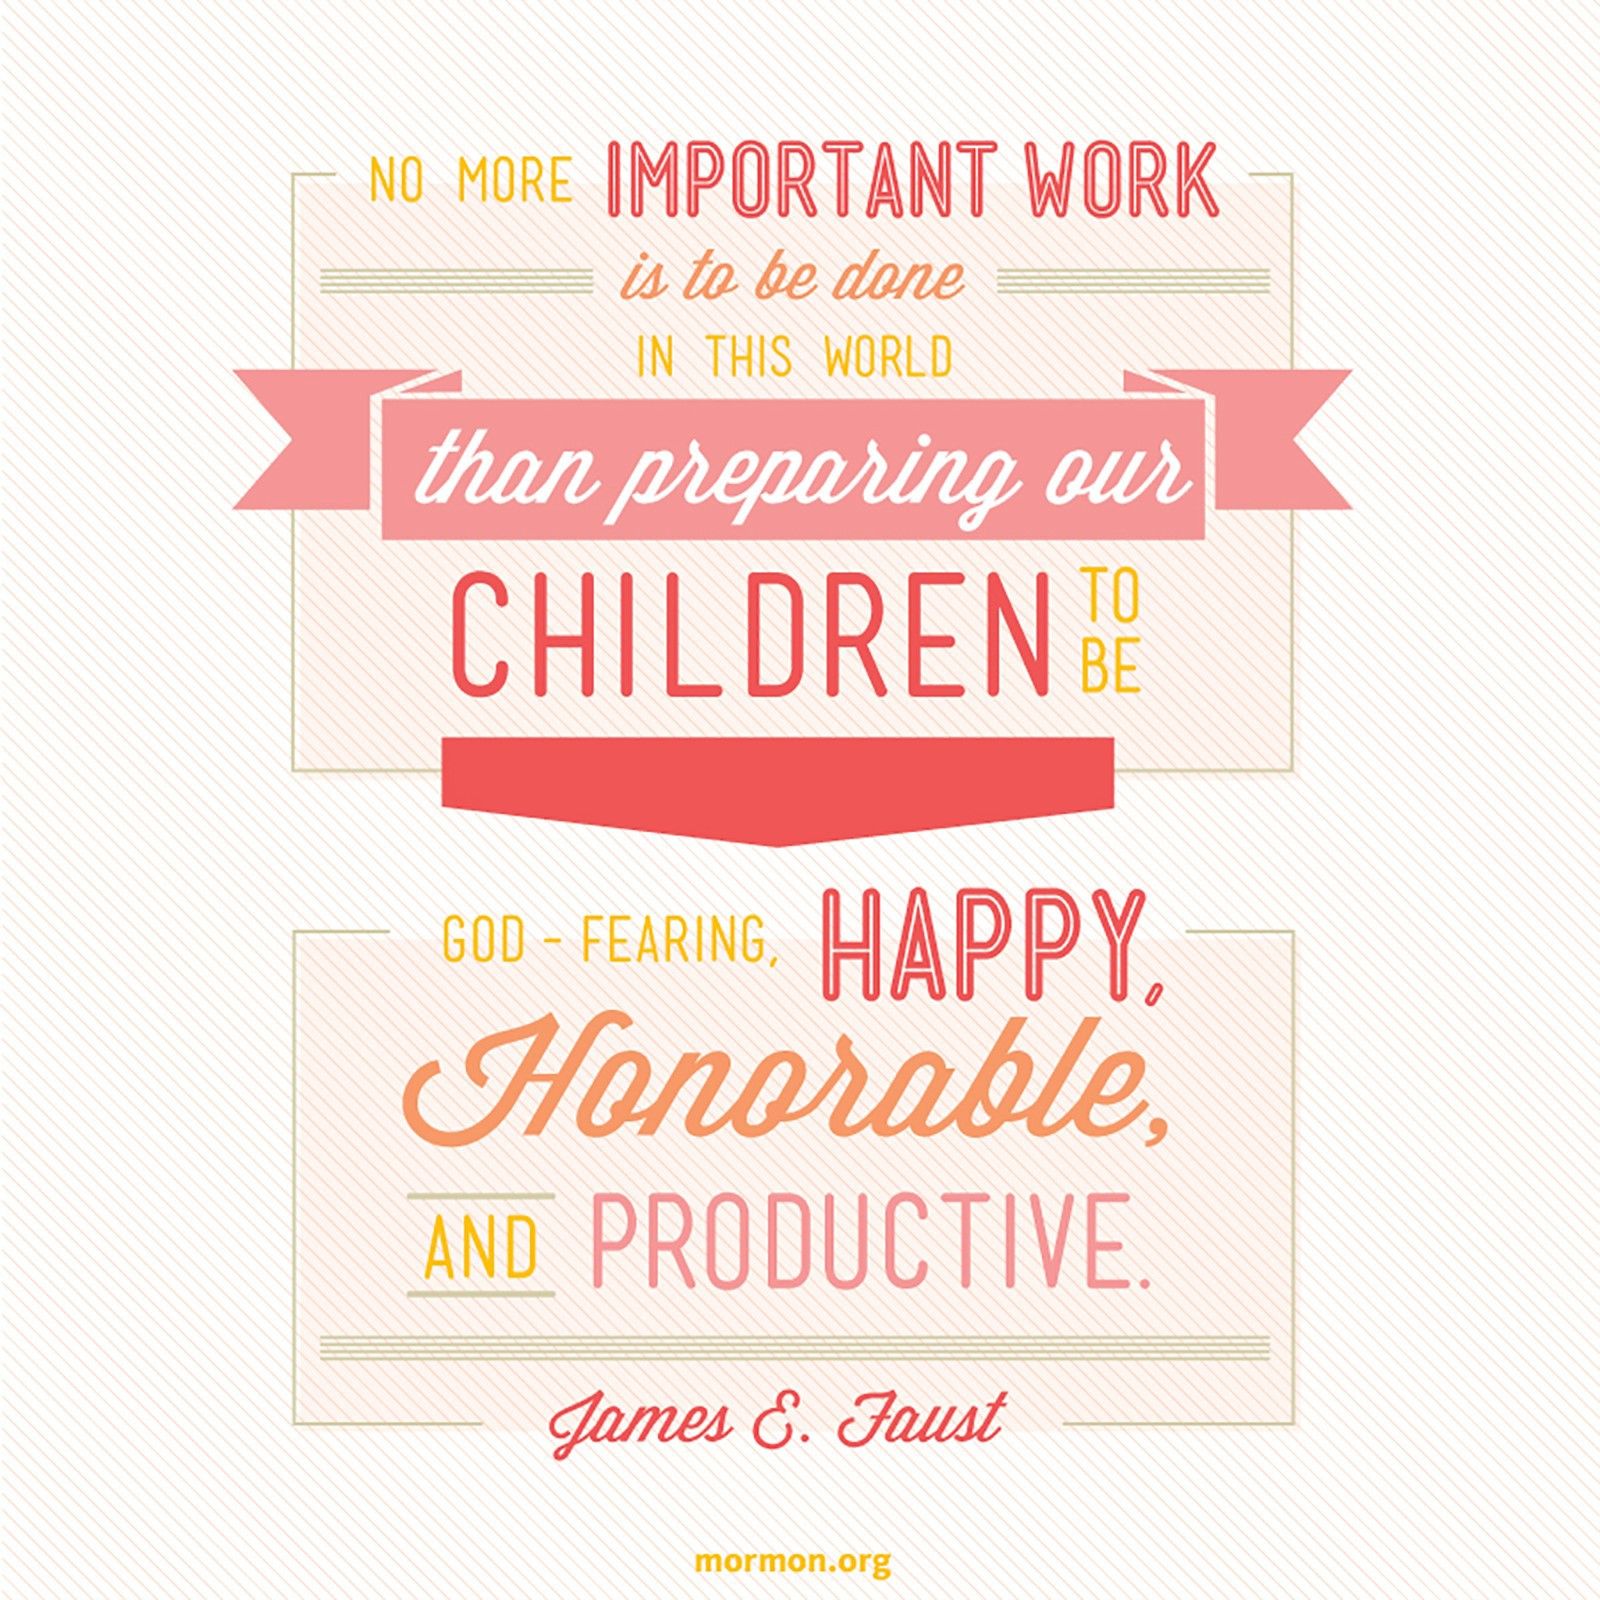 “No more important work is to be done in this world than preparing our children to be God-fearing, happy, honorable, and productive.”—President James E. Faust, “The Greatest Challenge in the World—Good Parenting”